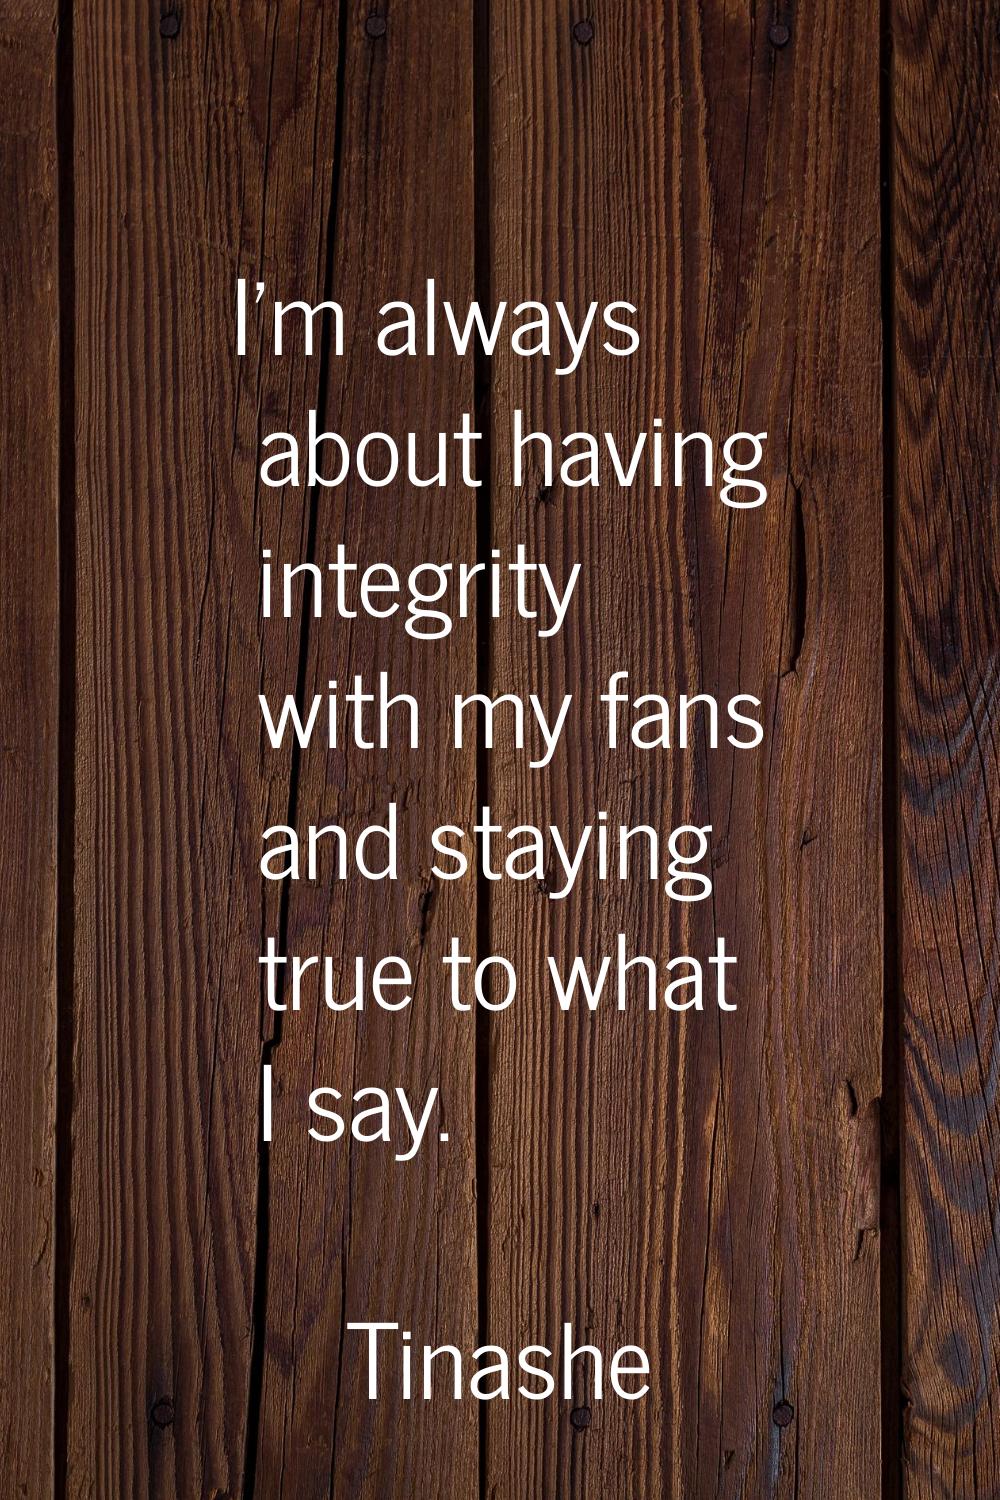 I'm always about having integrity with my fans and staying true to what I say.